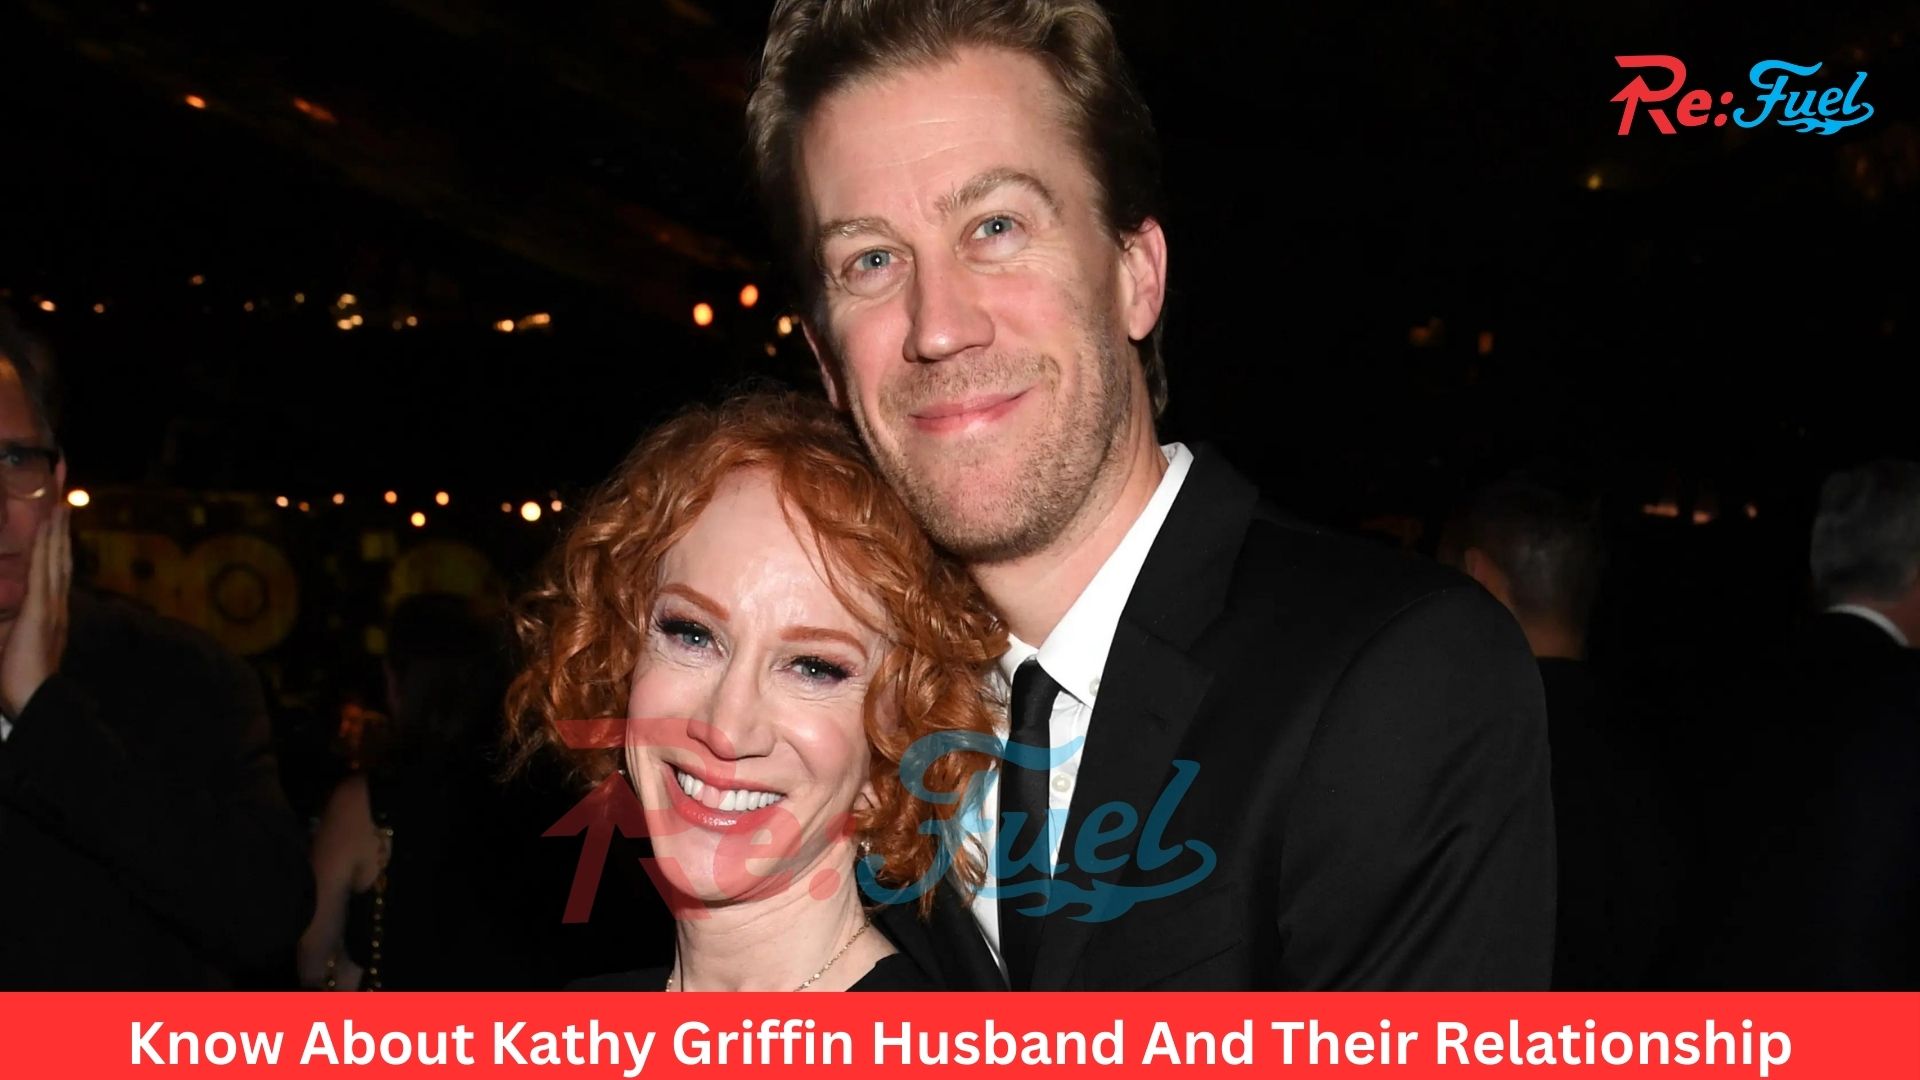 Know About Kathy Griffin Husband And Their Relationship